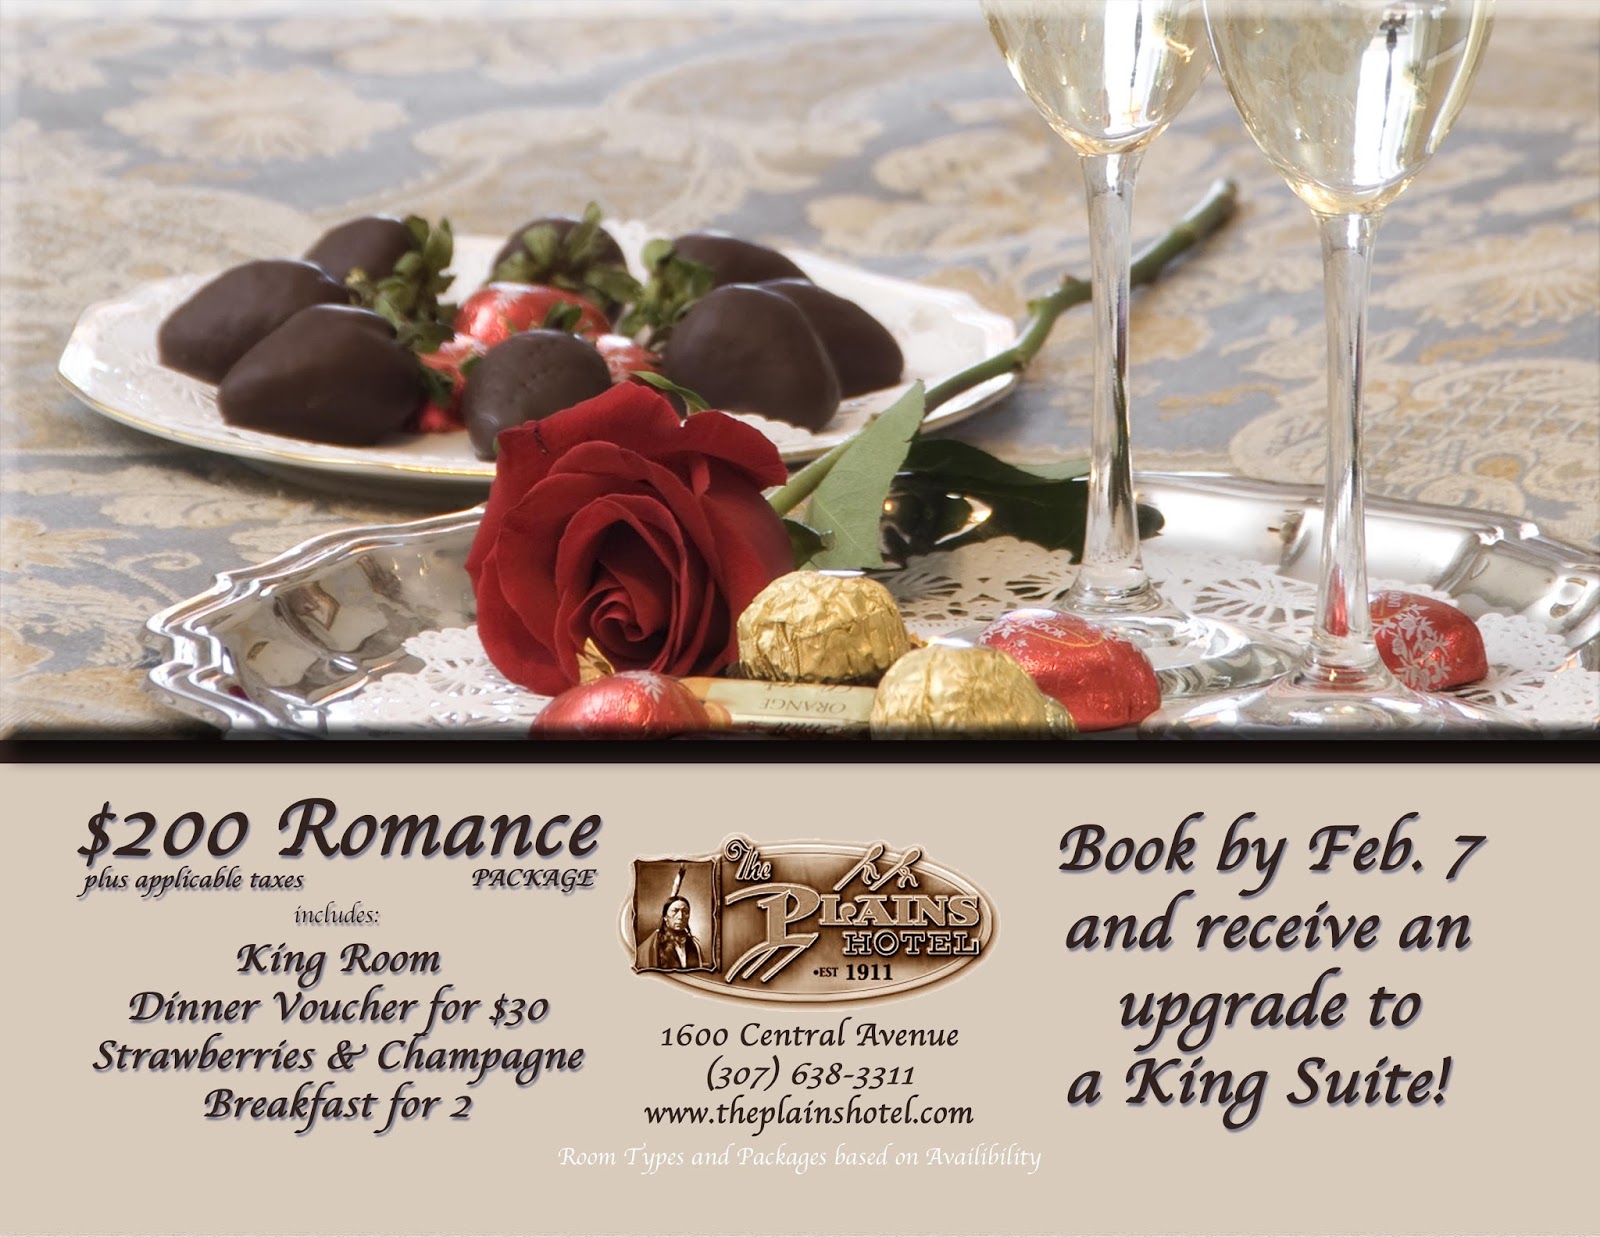 The Historic Plains Hotel Romance Package for Valentine's Day!